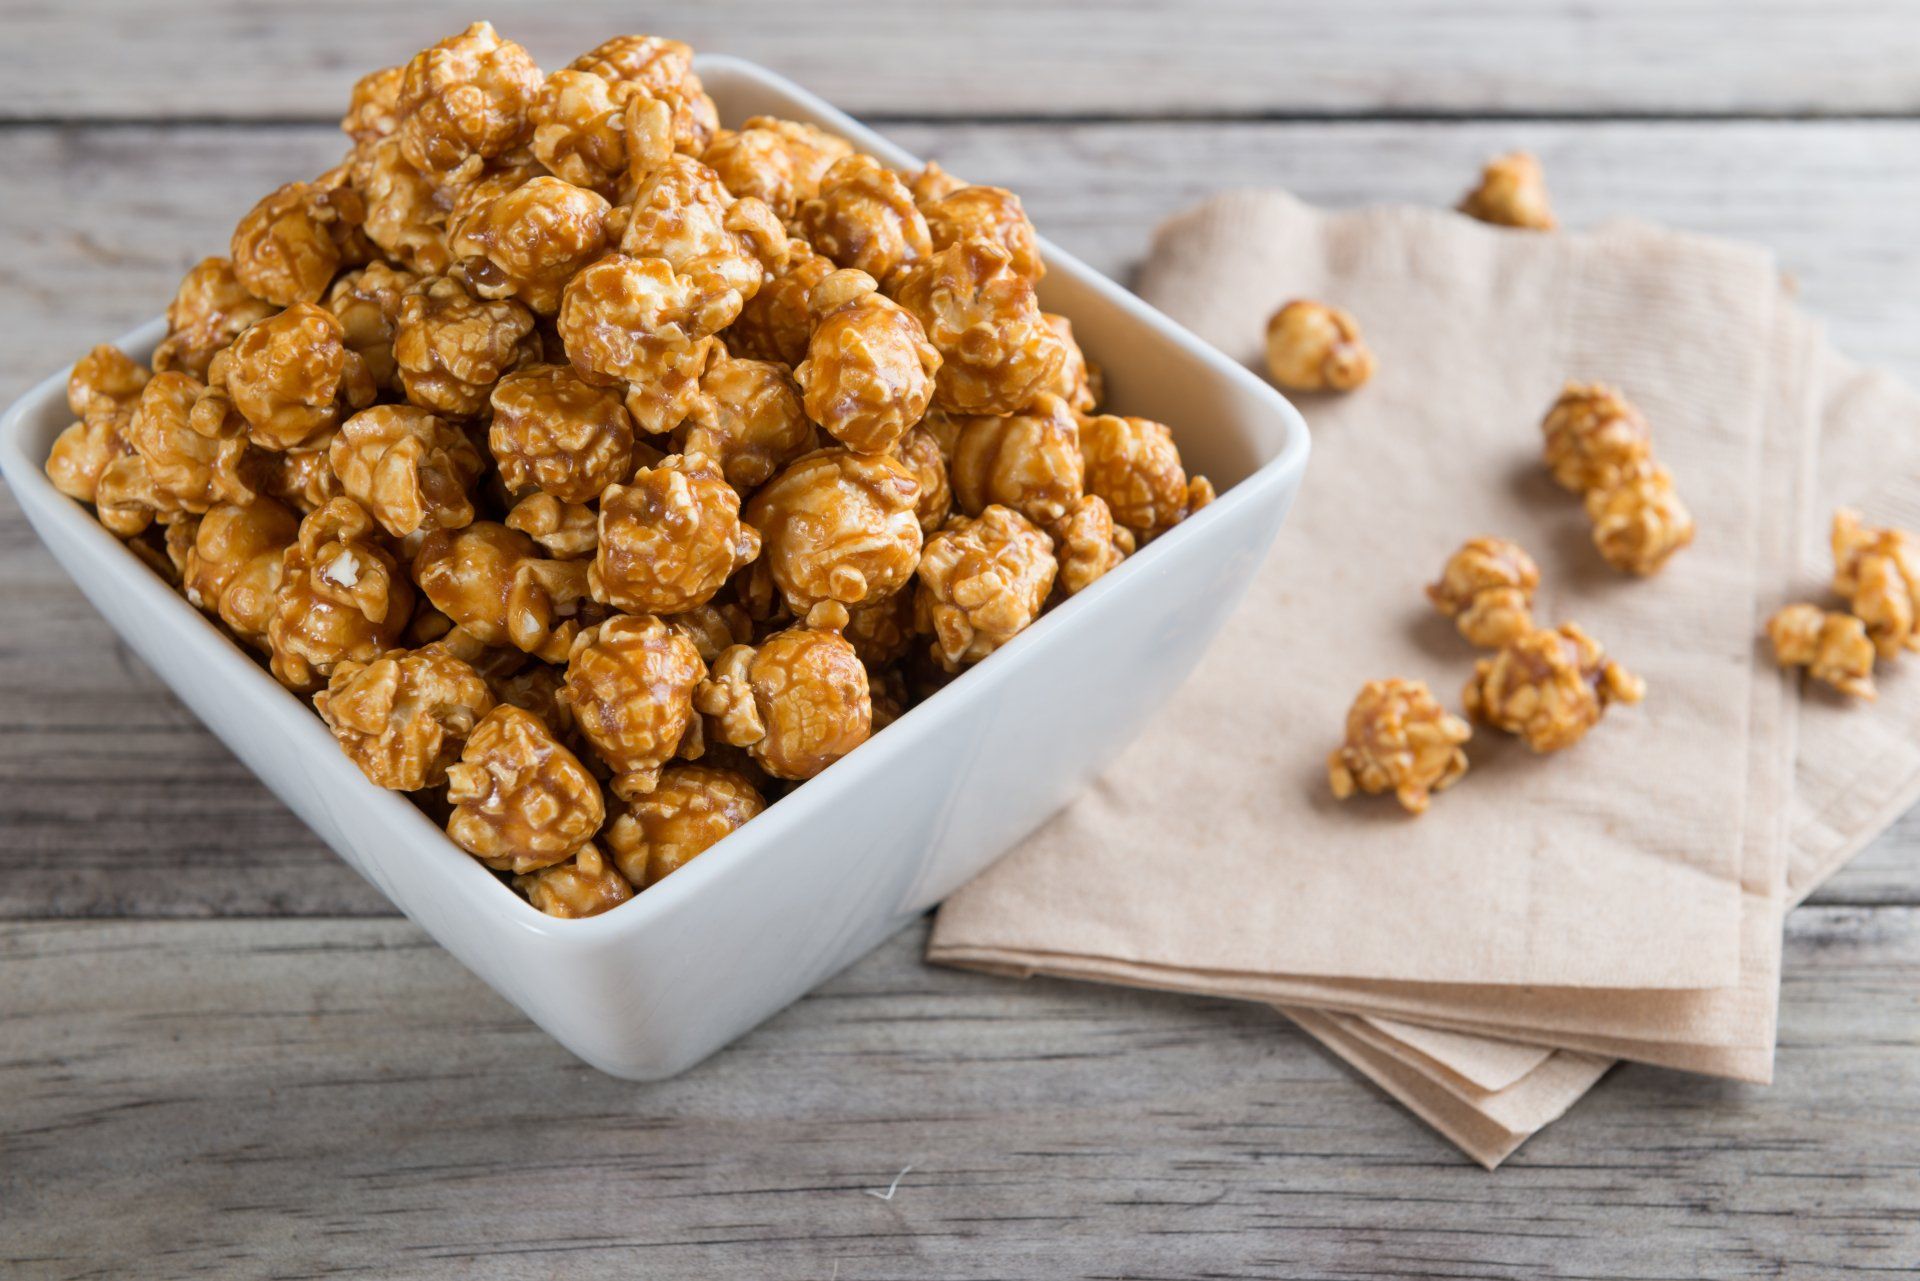 Caramel Corm from  from Maier's Gourmet Popcorn | Formerly Docs Gourmet Popcorn